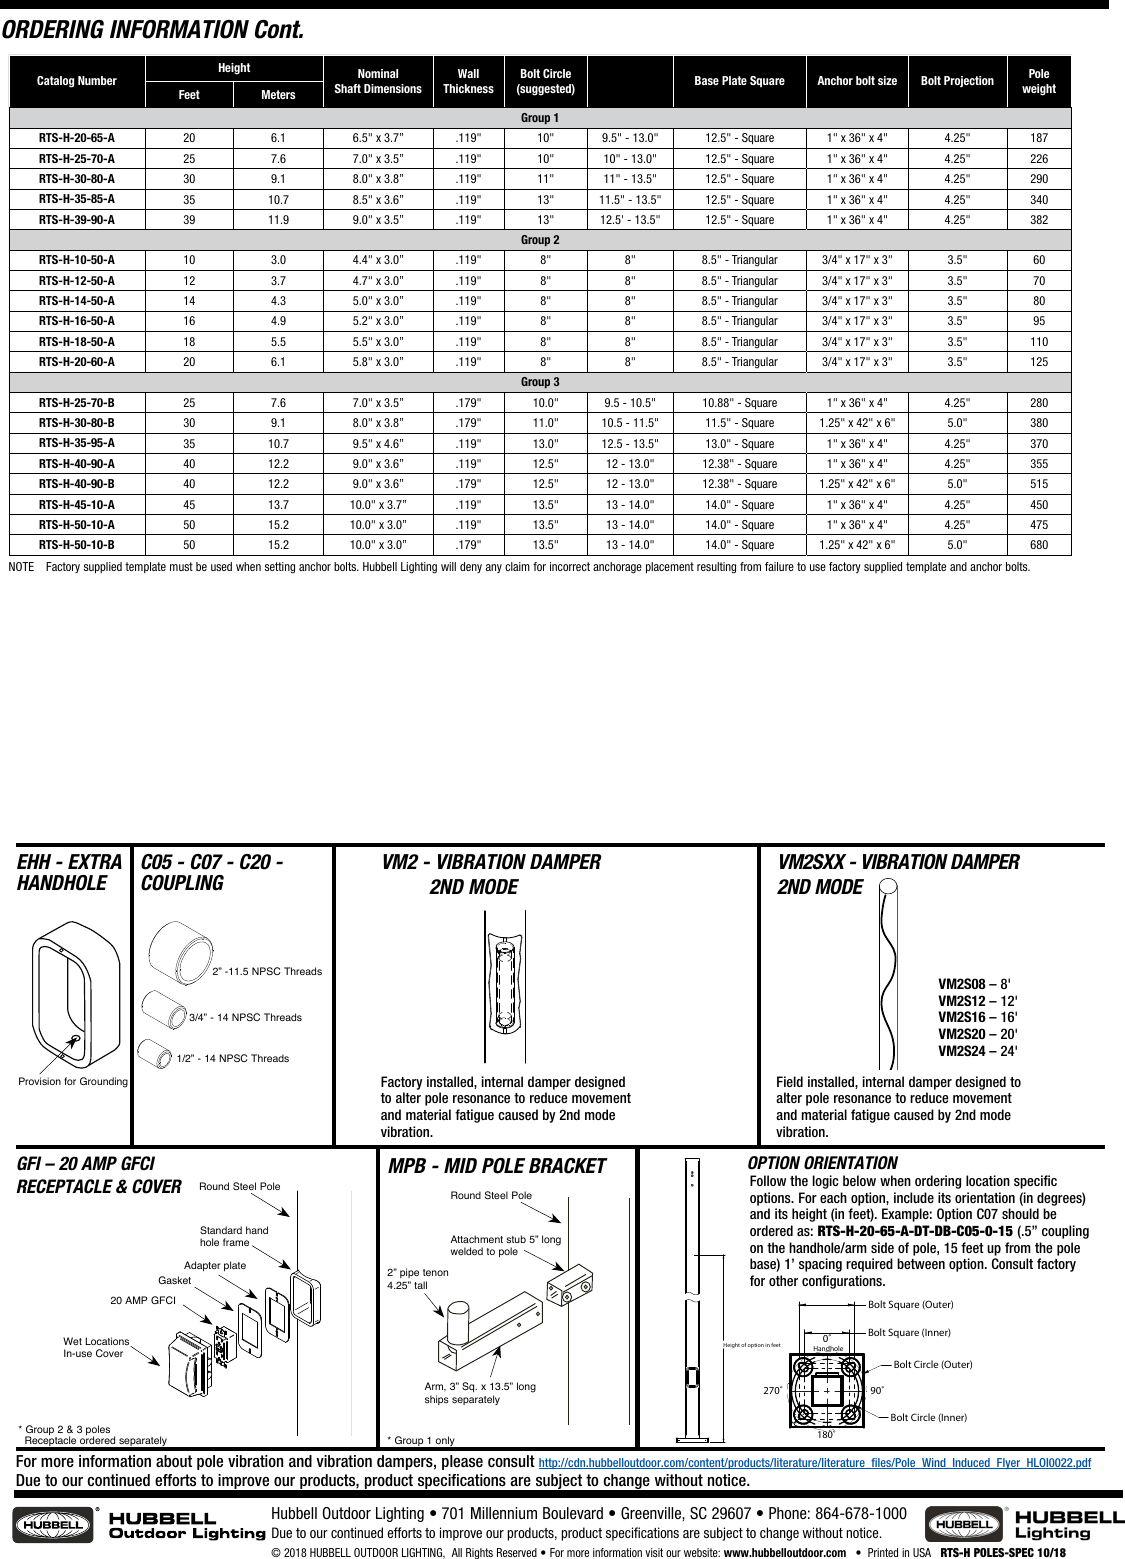 Page 2 of 3 - RTS-H Poles Spec Sheet